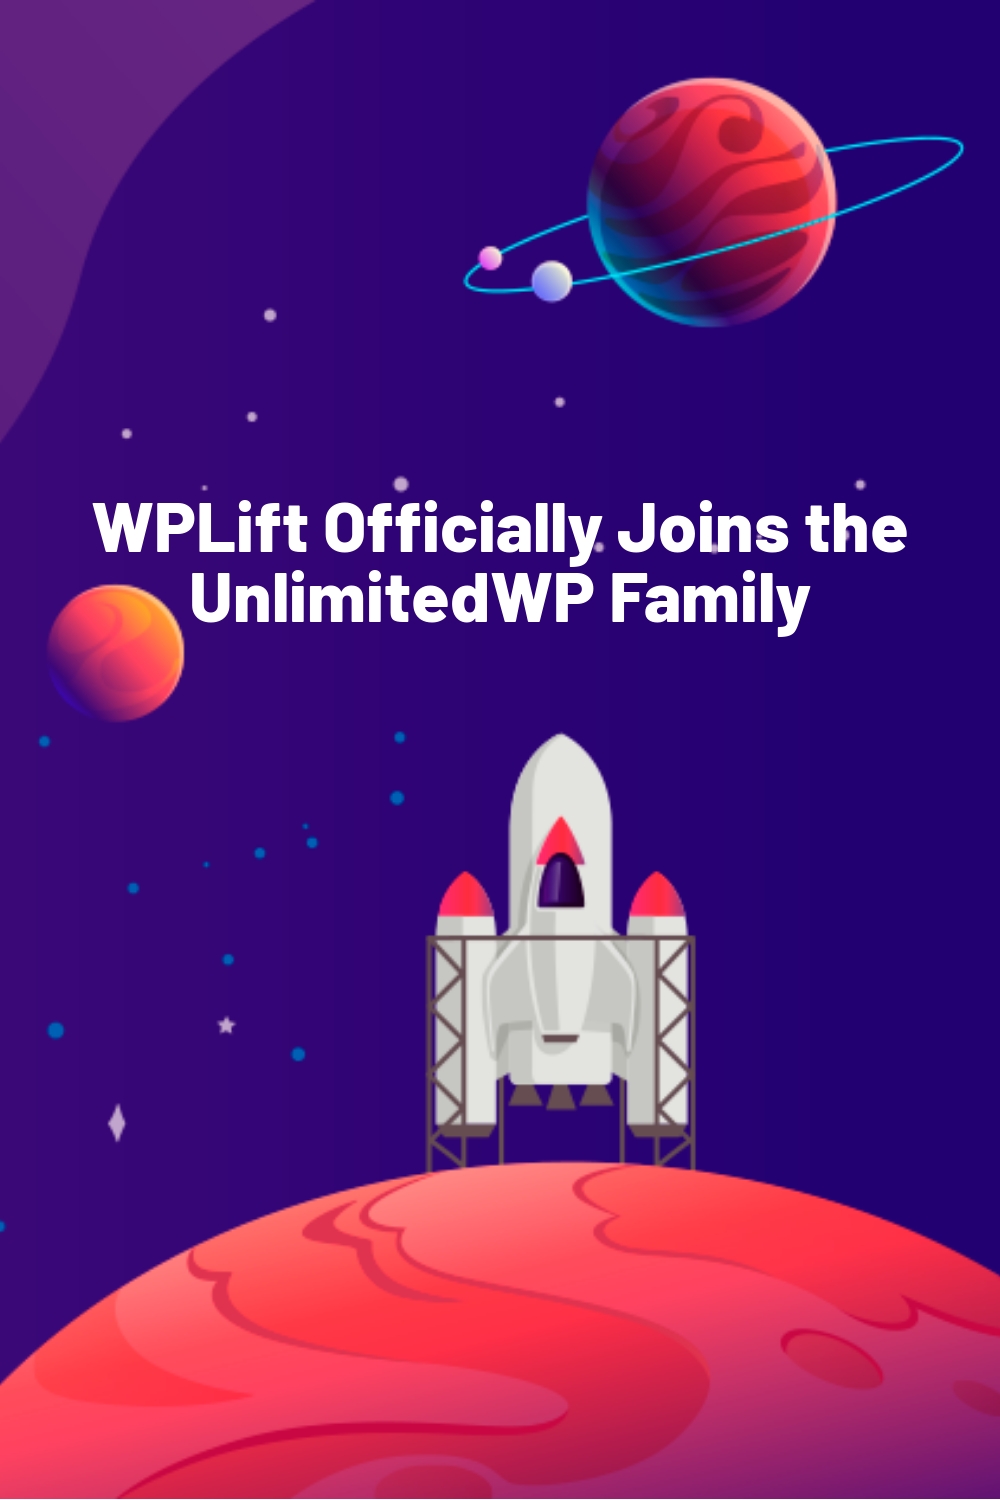 WPLift Officially Joins the UnlimitedWP Family